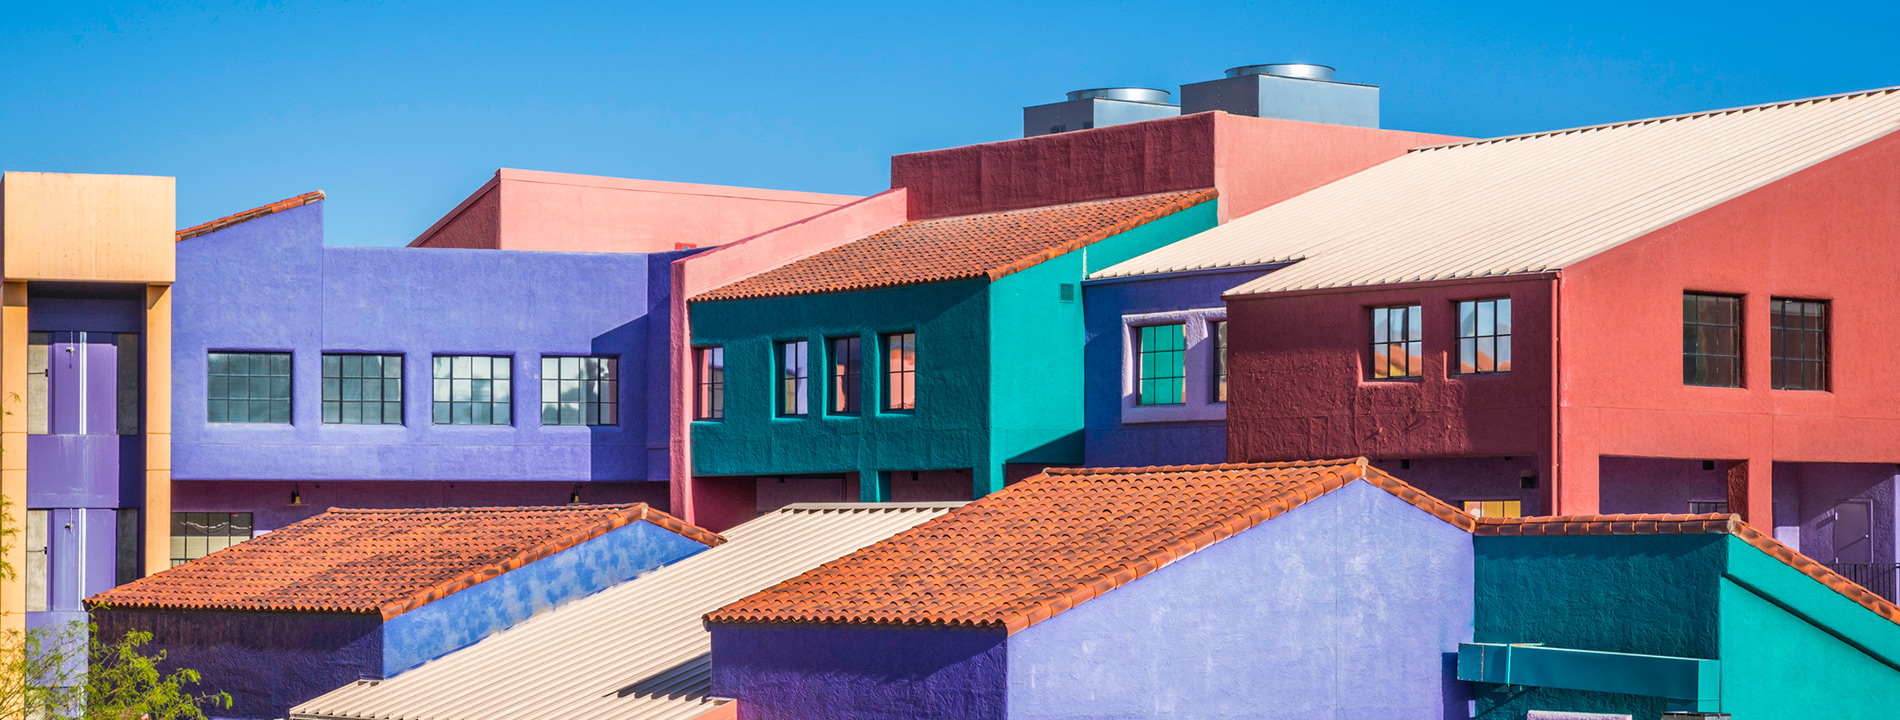 Colorful buildings in a neighborhood near The Fountains at La Cholla.